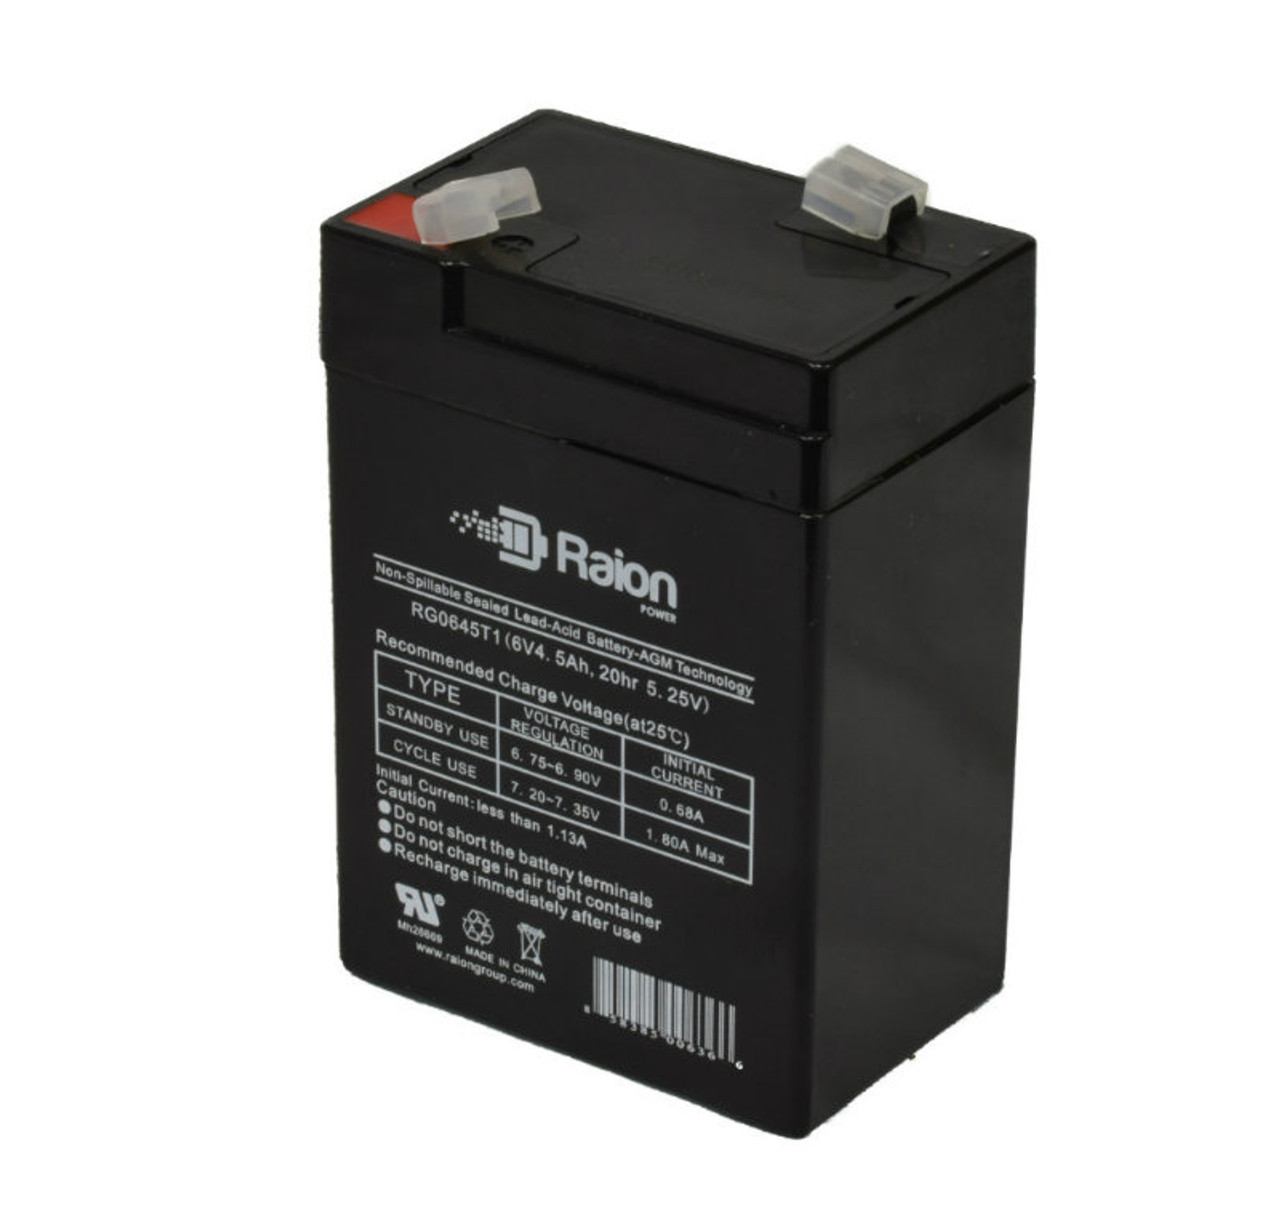 Raion Power RG0645T1 6V 4.5Ah Replacement Battery Cartridge for Power Energy GB6-4.5